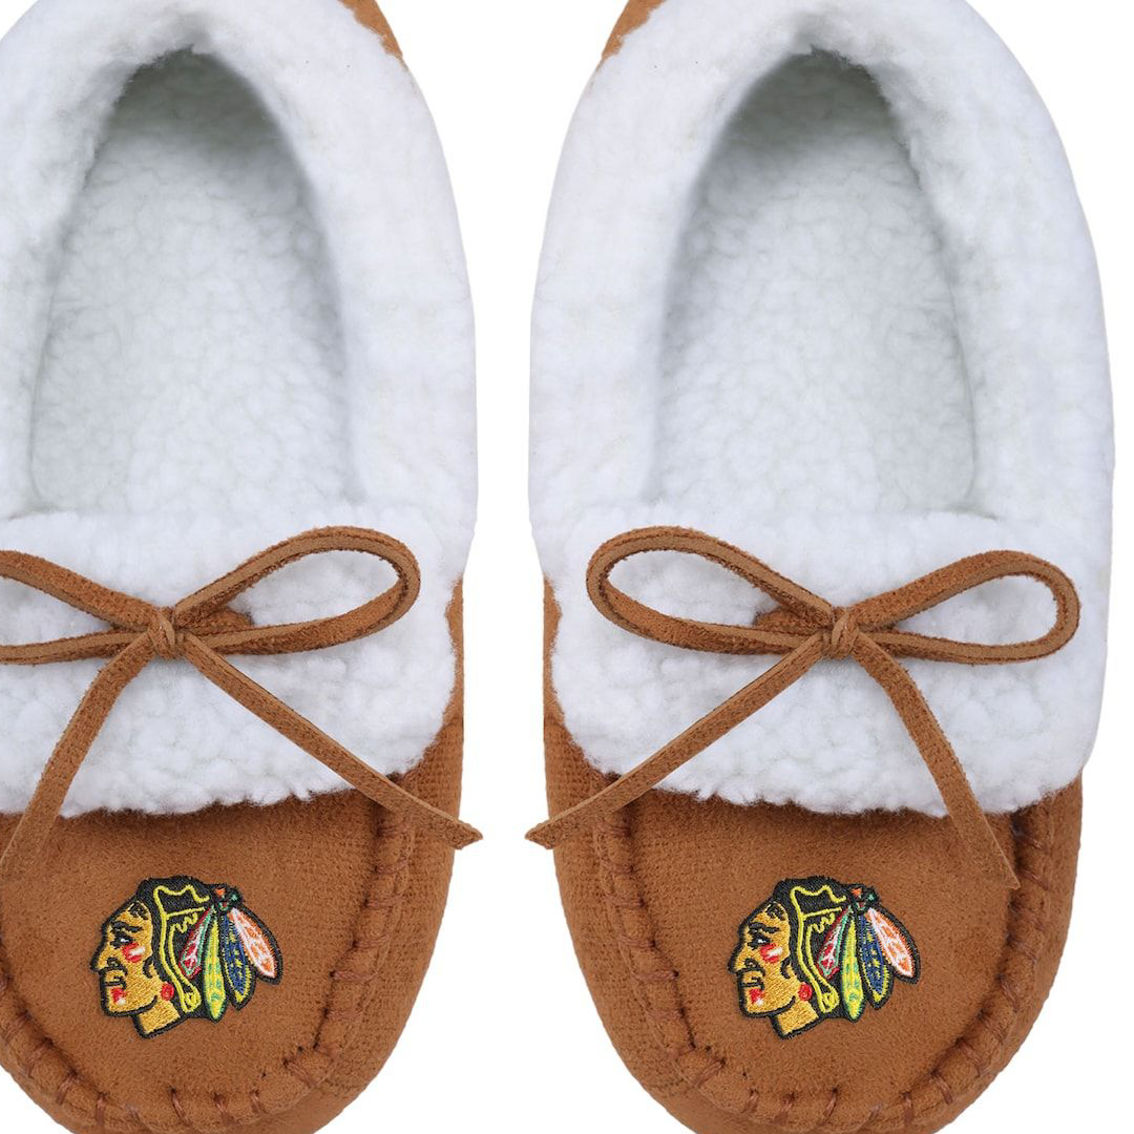 FOCO Youth Chicago Blackhawks Moccasin Slippers - Image 2 of 4